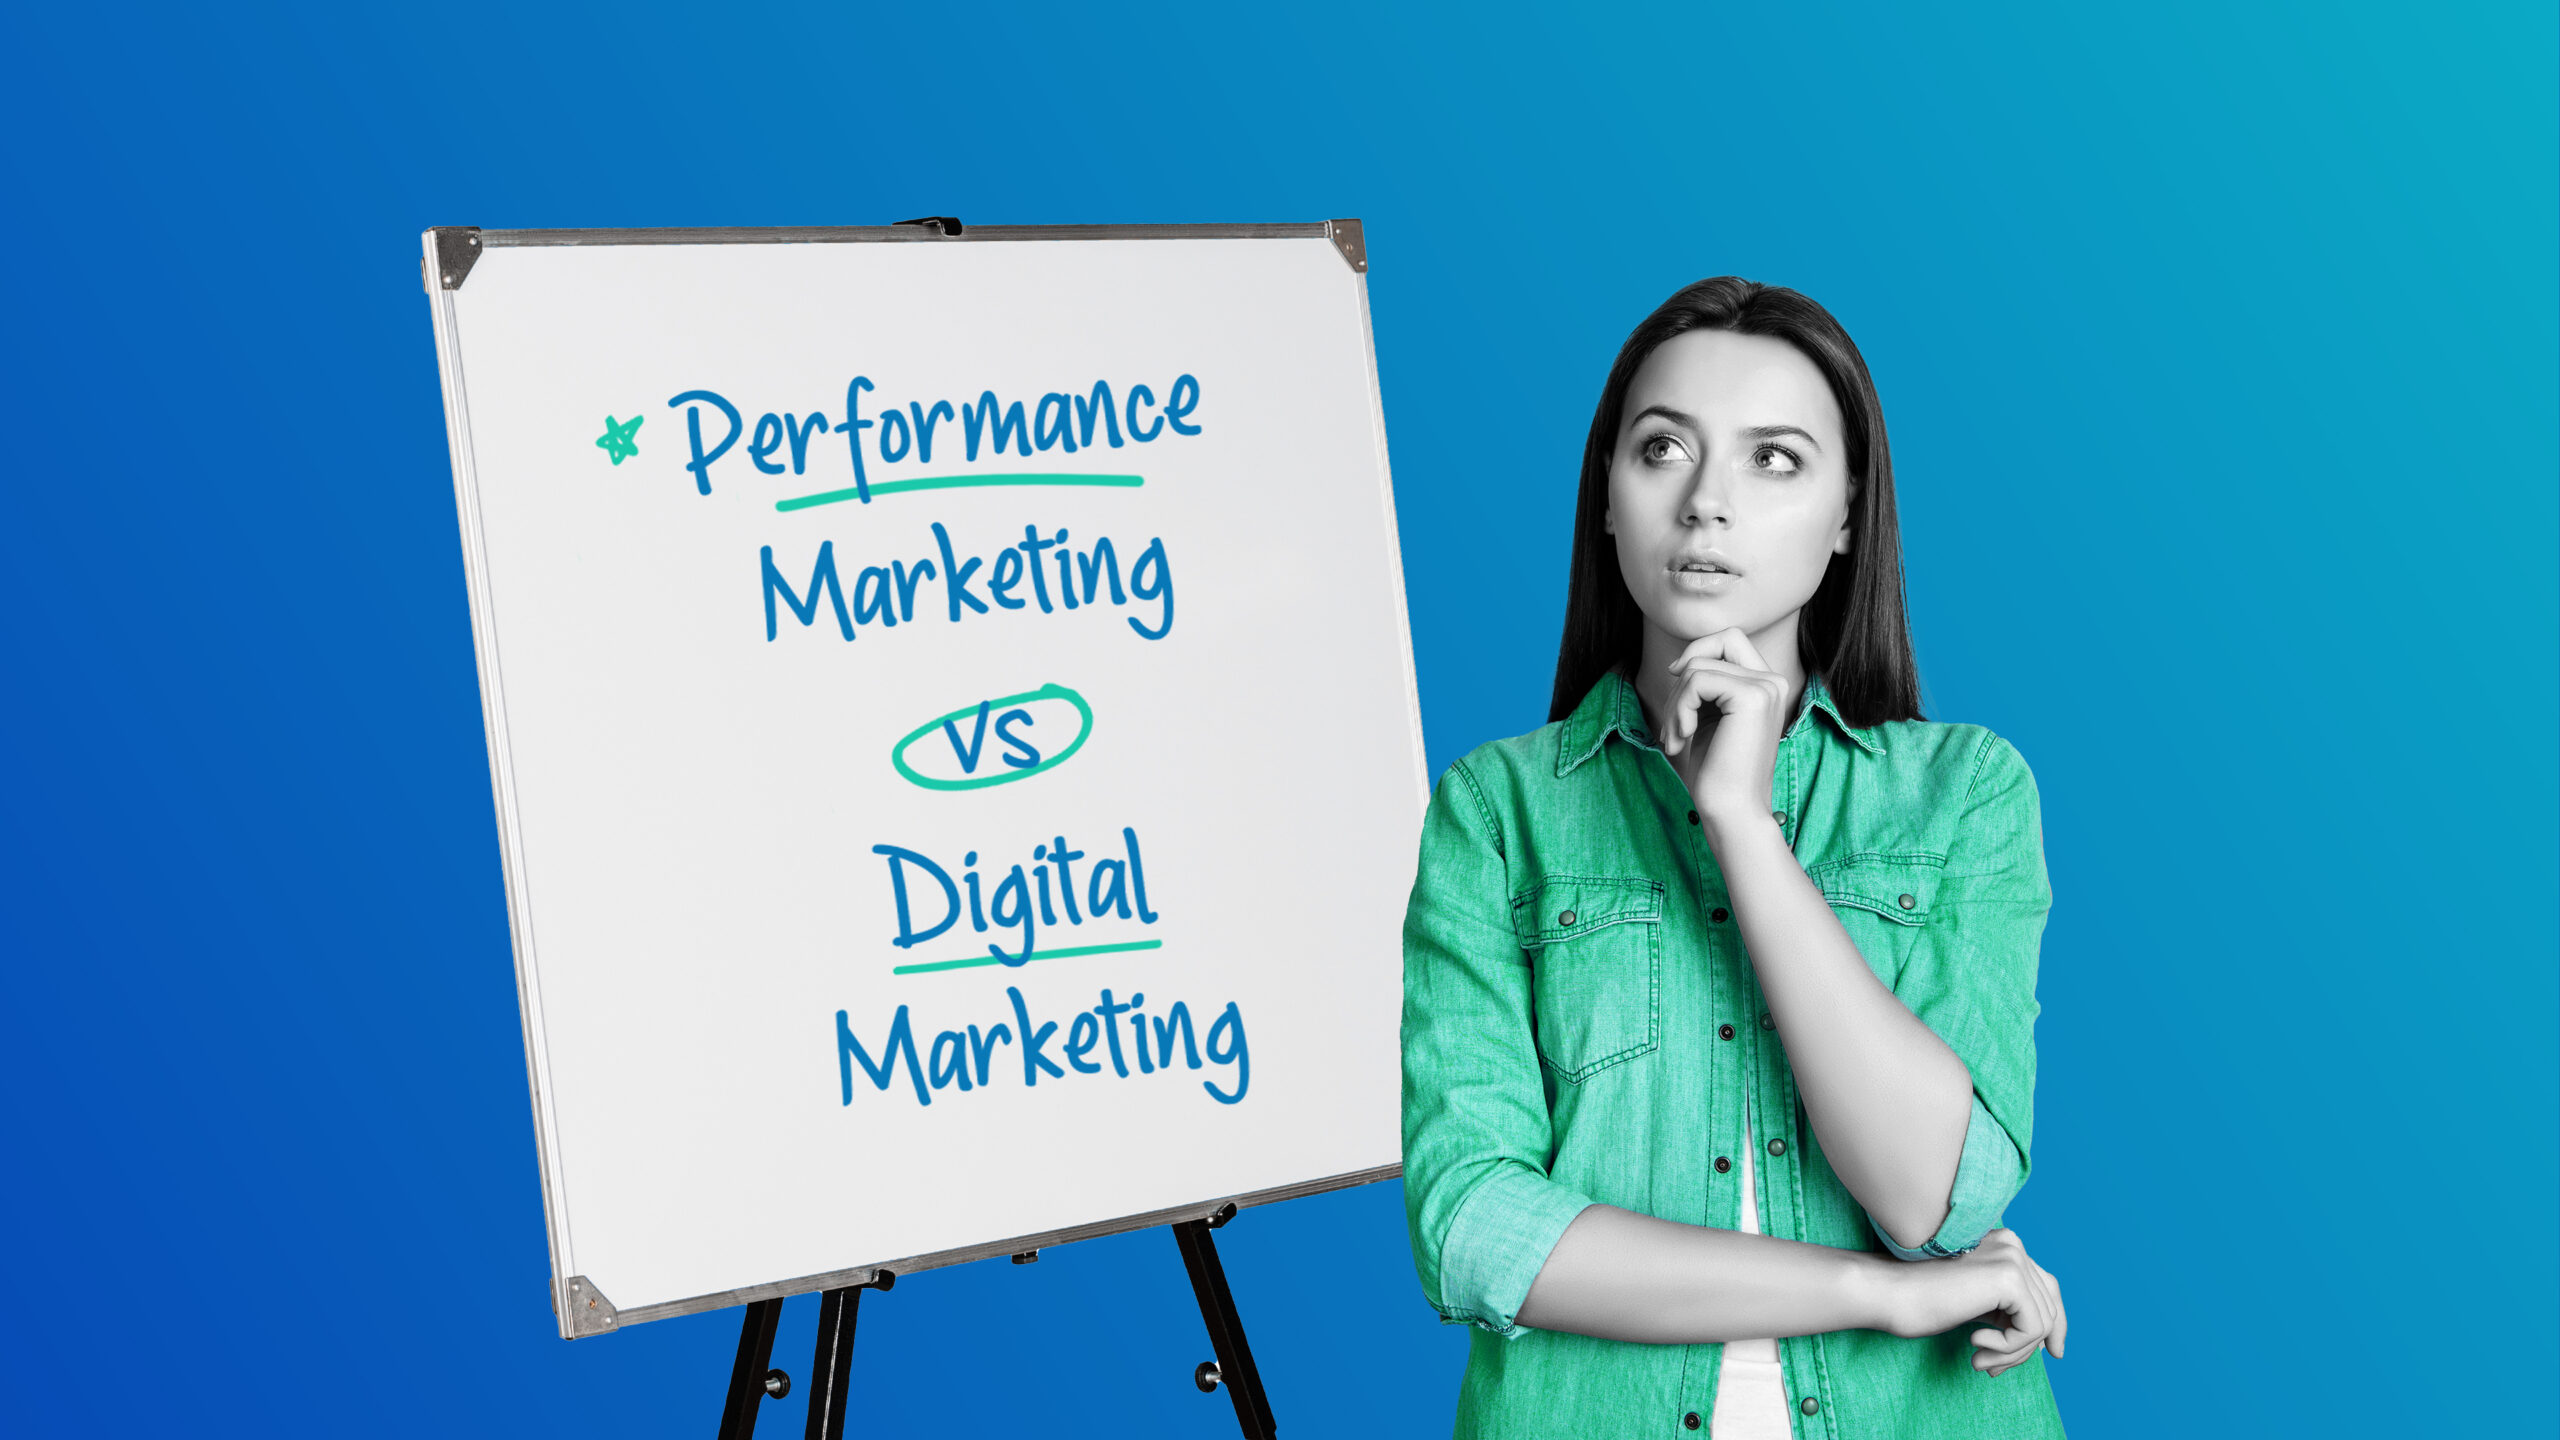 MNTN-SEO-Blog-Performance-Marketing-vs-Digital-Marketing-Whats-the-Difference-scaled.jpg